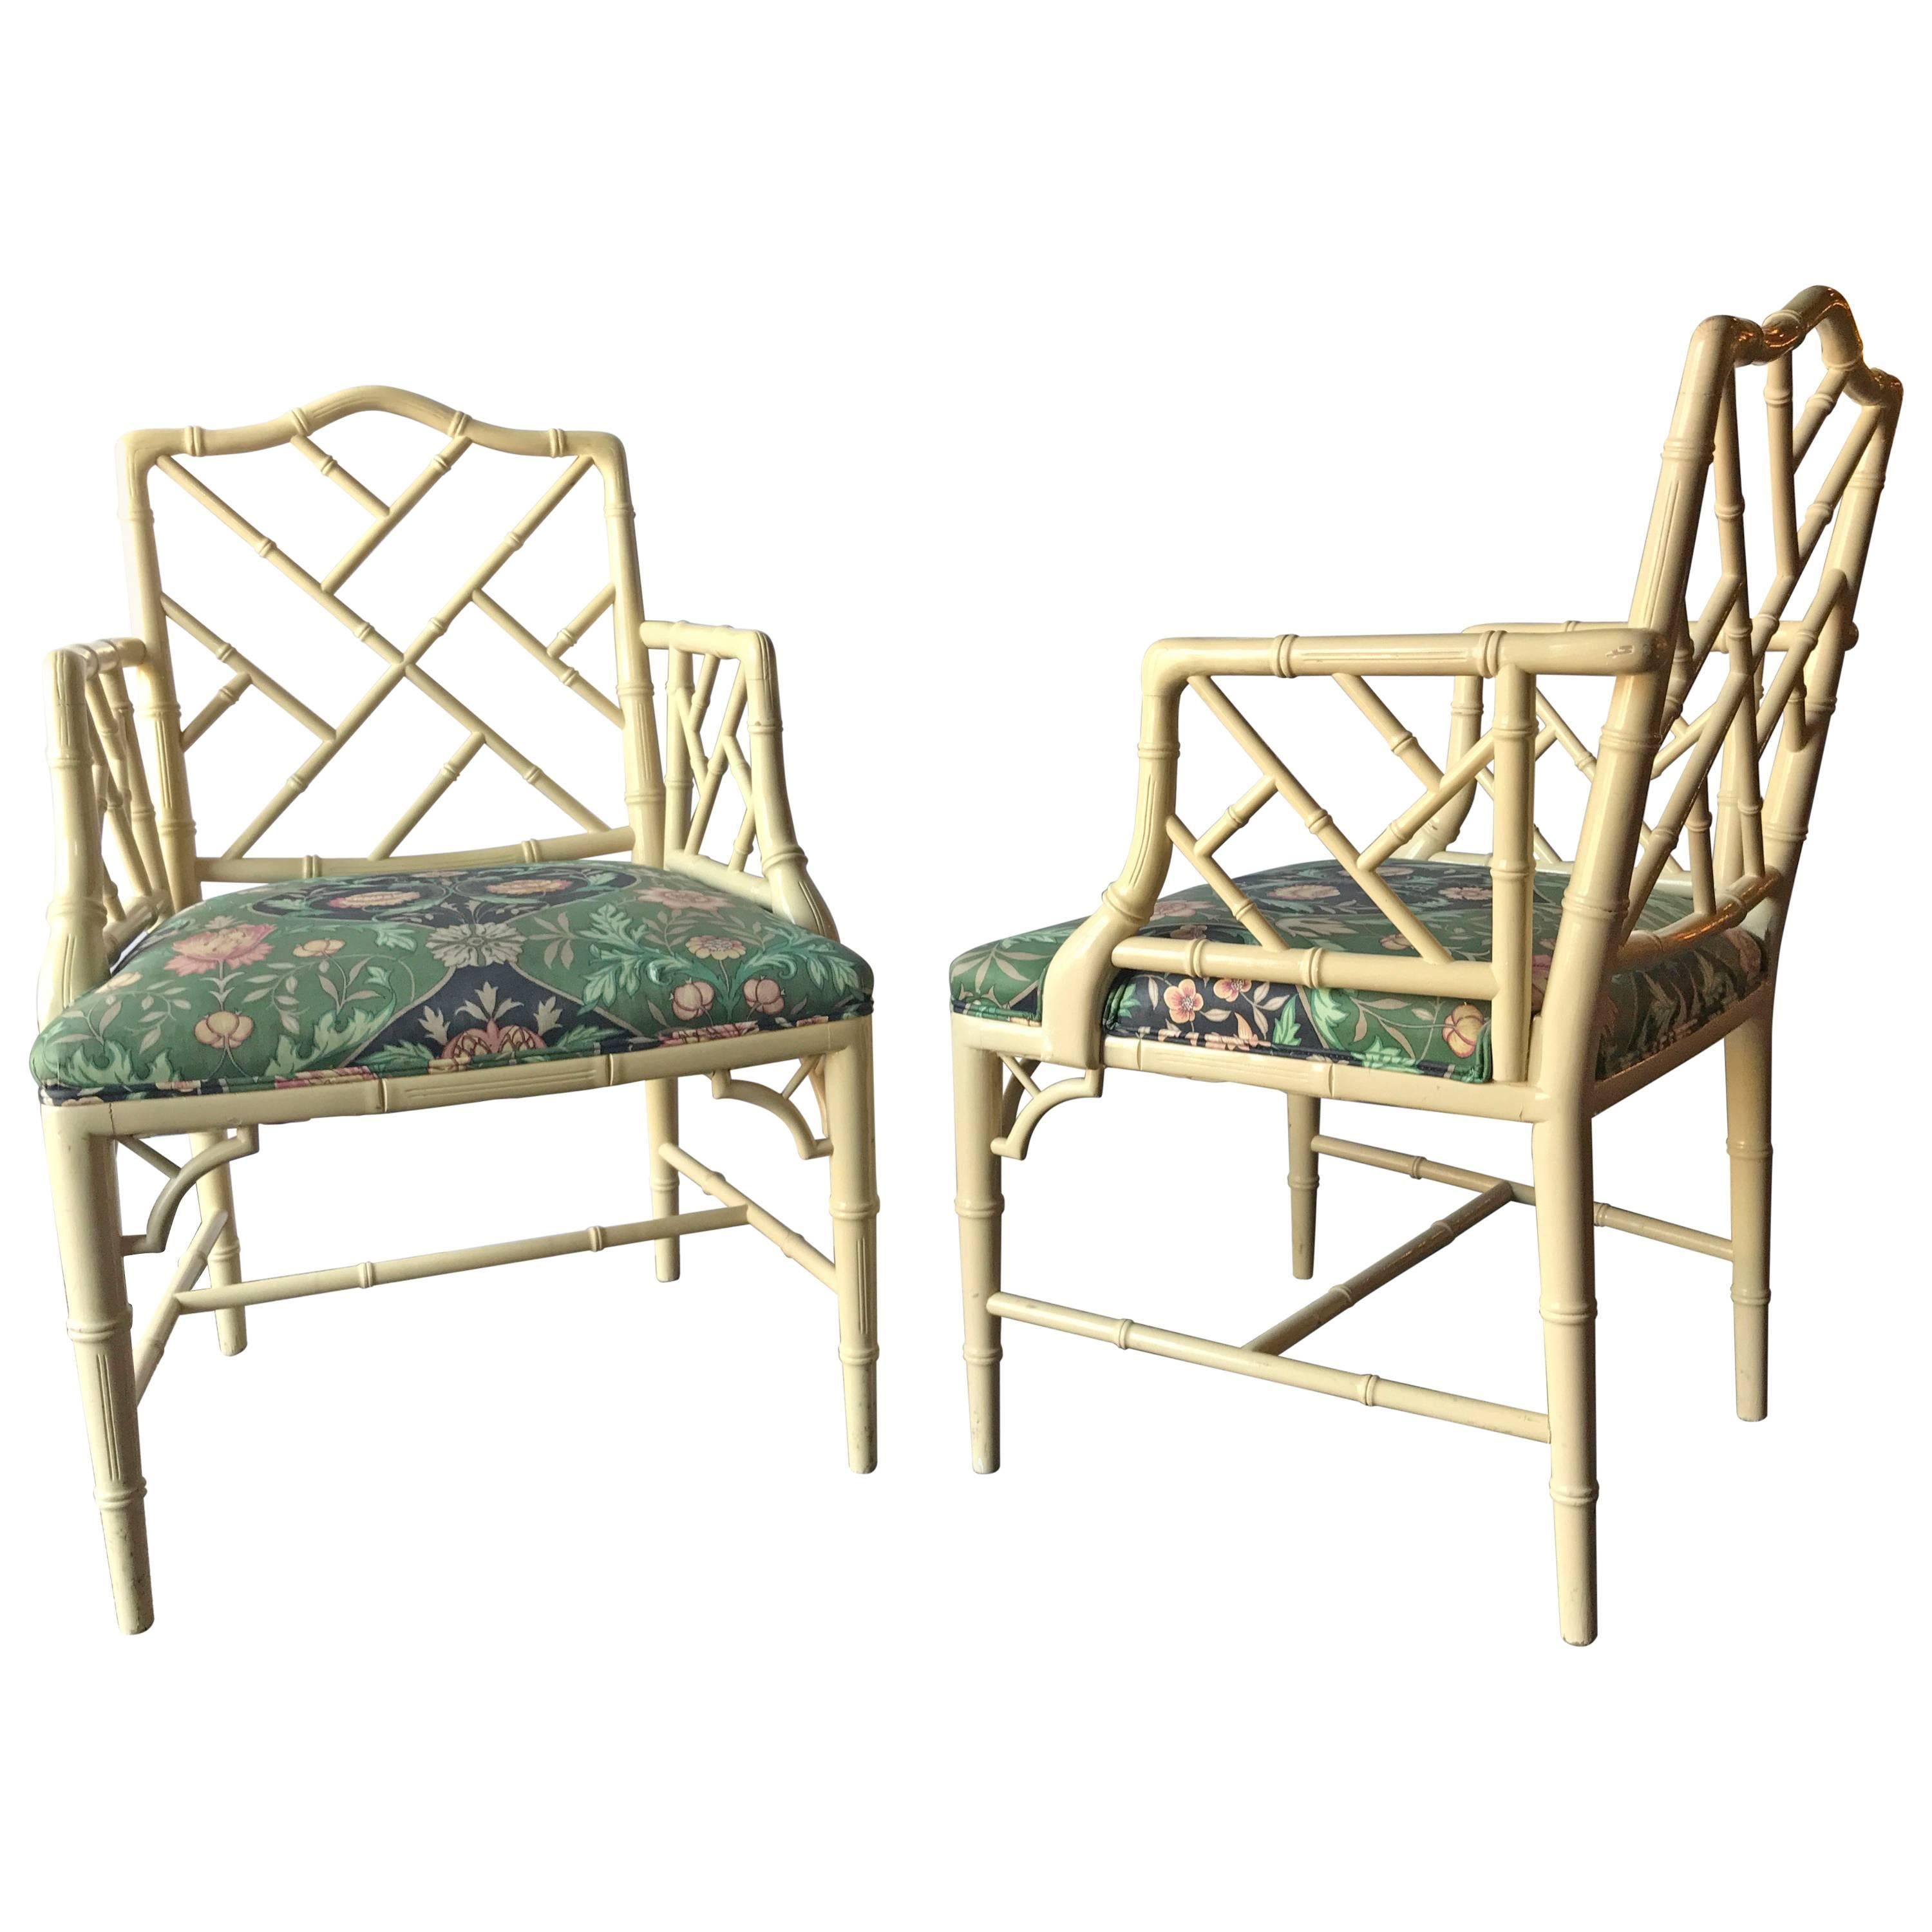 Pair of Custom Bamboo Form Armchairs in a Fine Florida Room Fabric